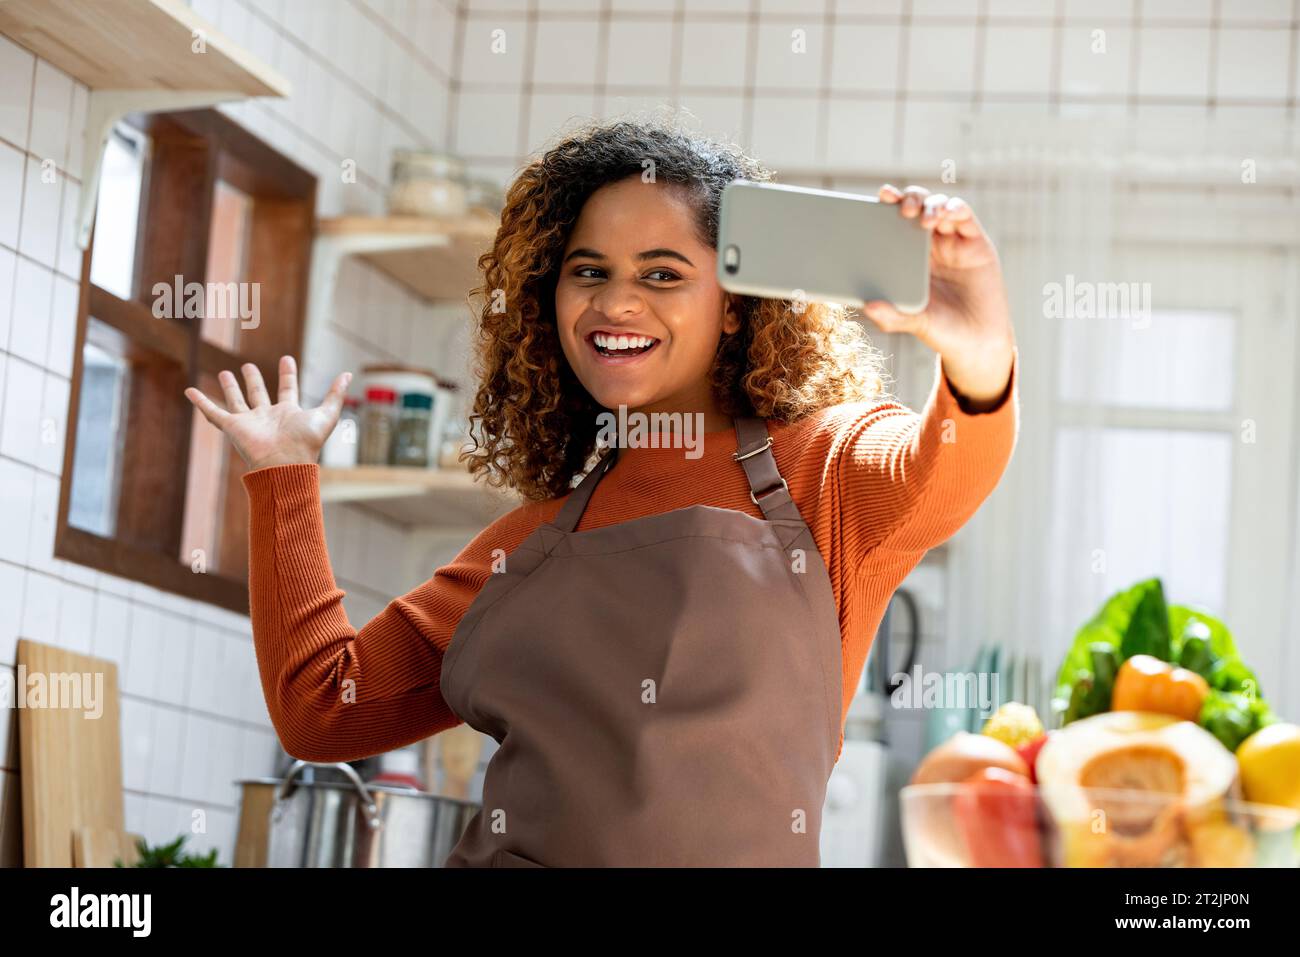 Happy African American lady using cellphone during online class in blurred background of the kitchen Stock Photo